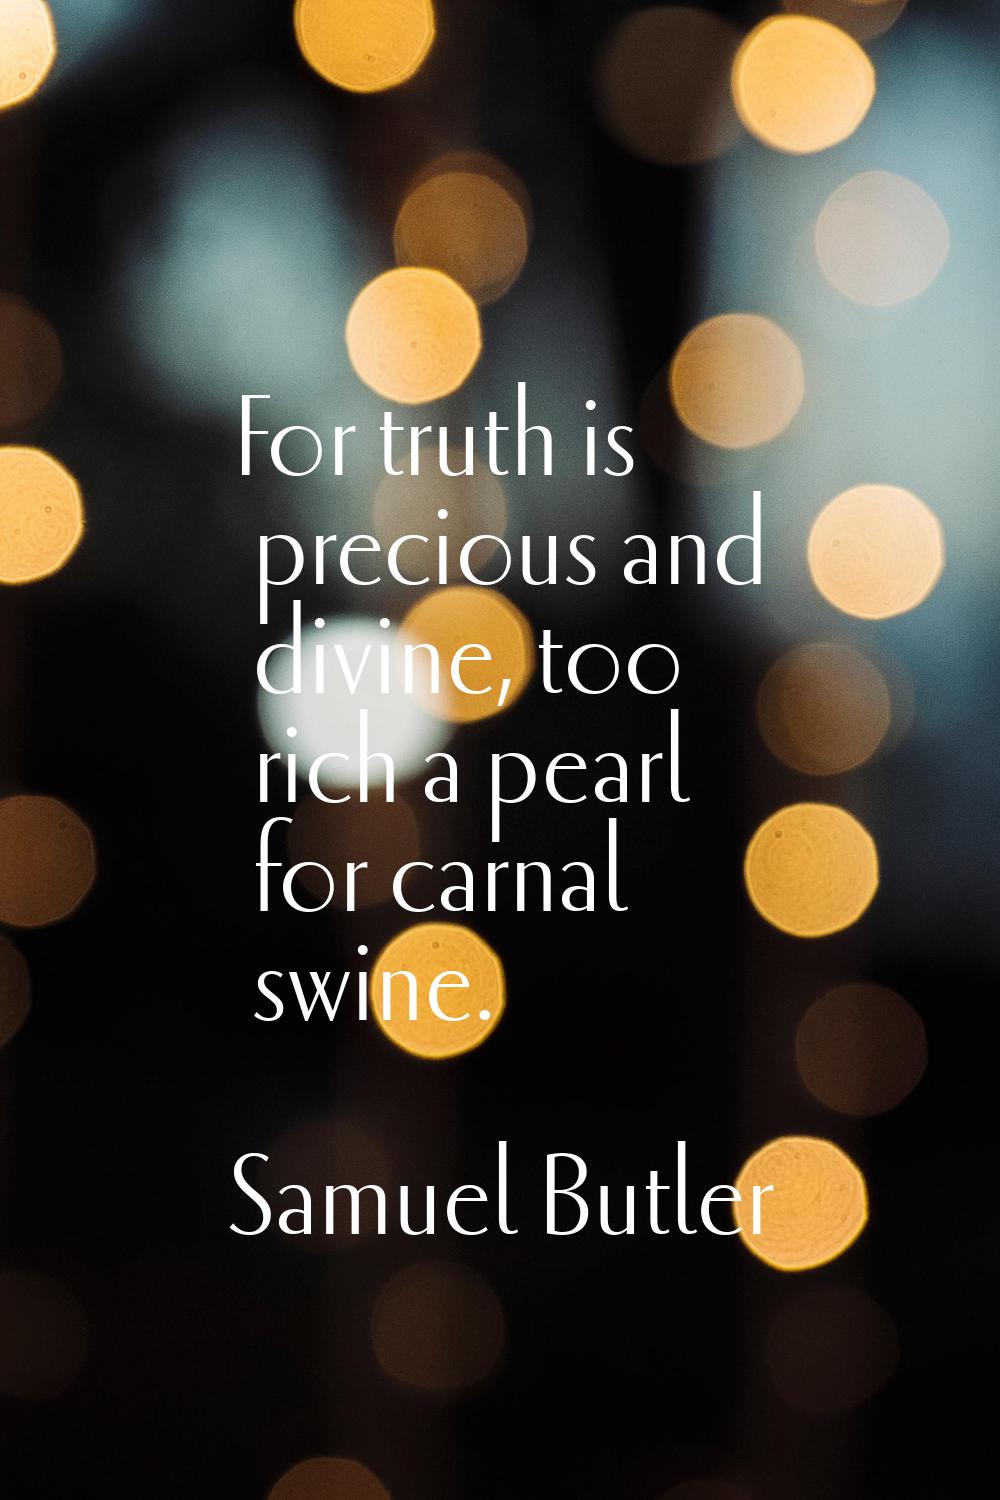 For truth is precious and divine, too rich a pearl for carnal swine.